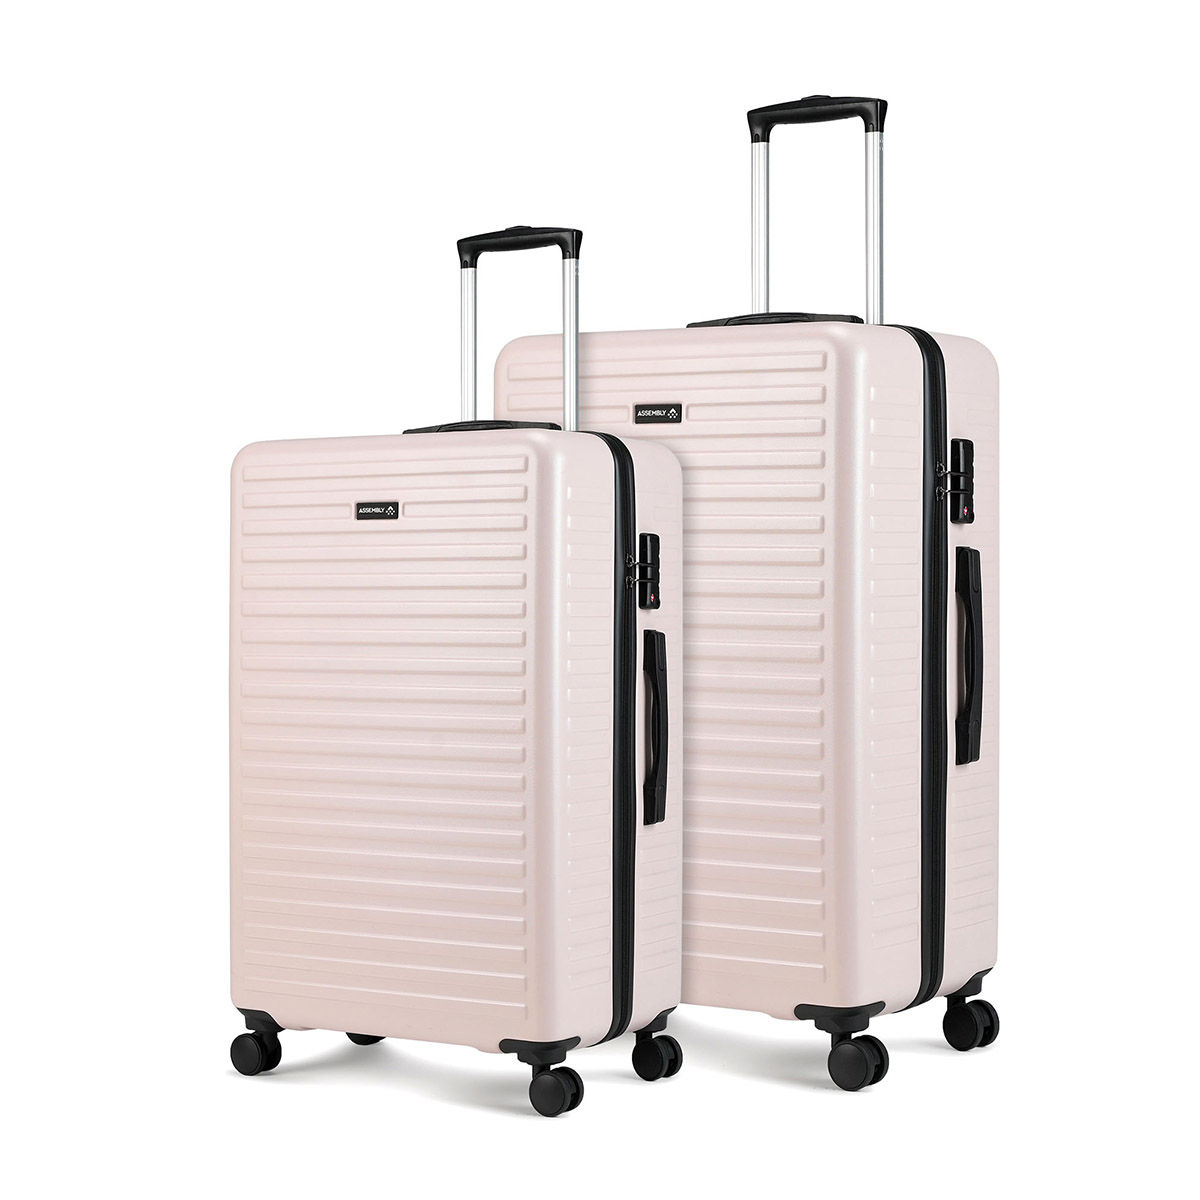 Buy American Tourister Instagon Spinner Trolley Bag 81cm Online - Shop  Fashion, Accessories & Luggage on Carrefour UAE